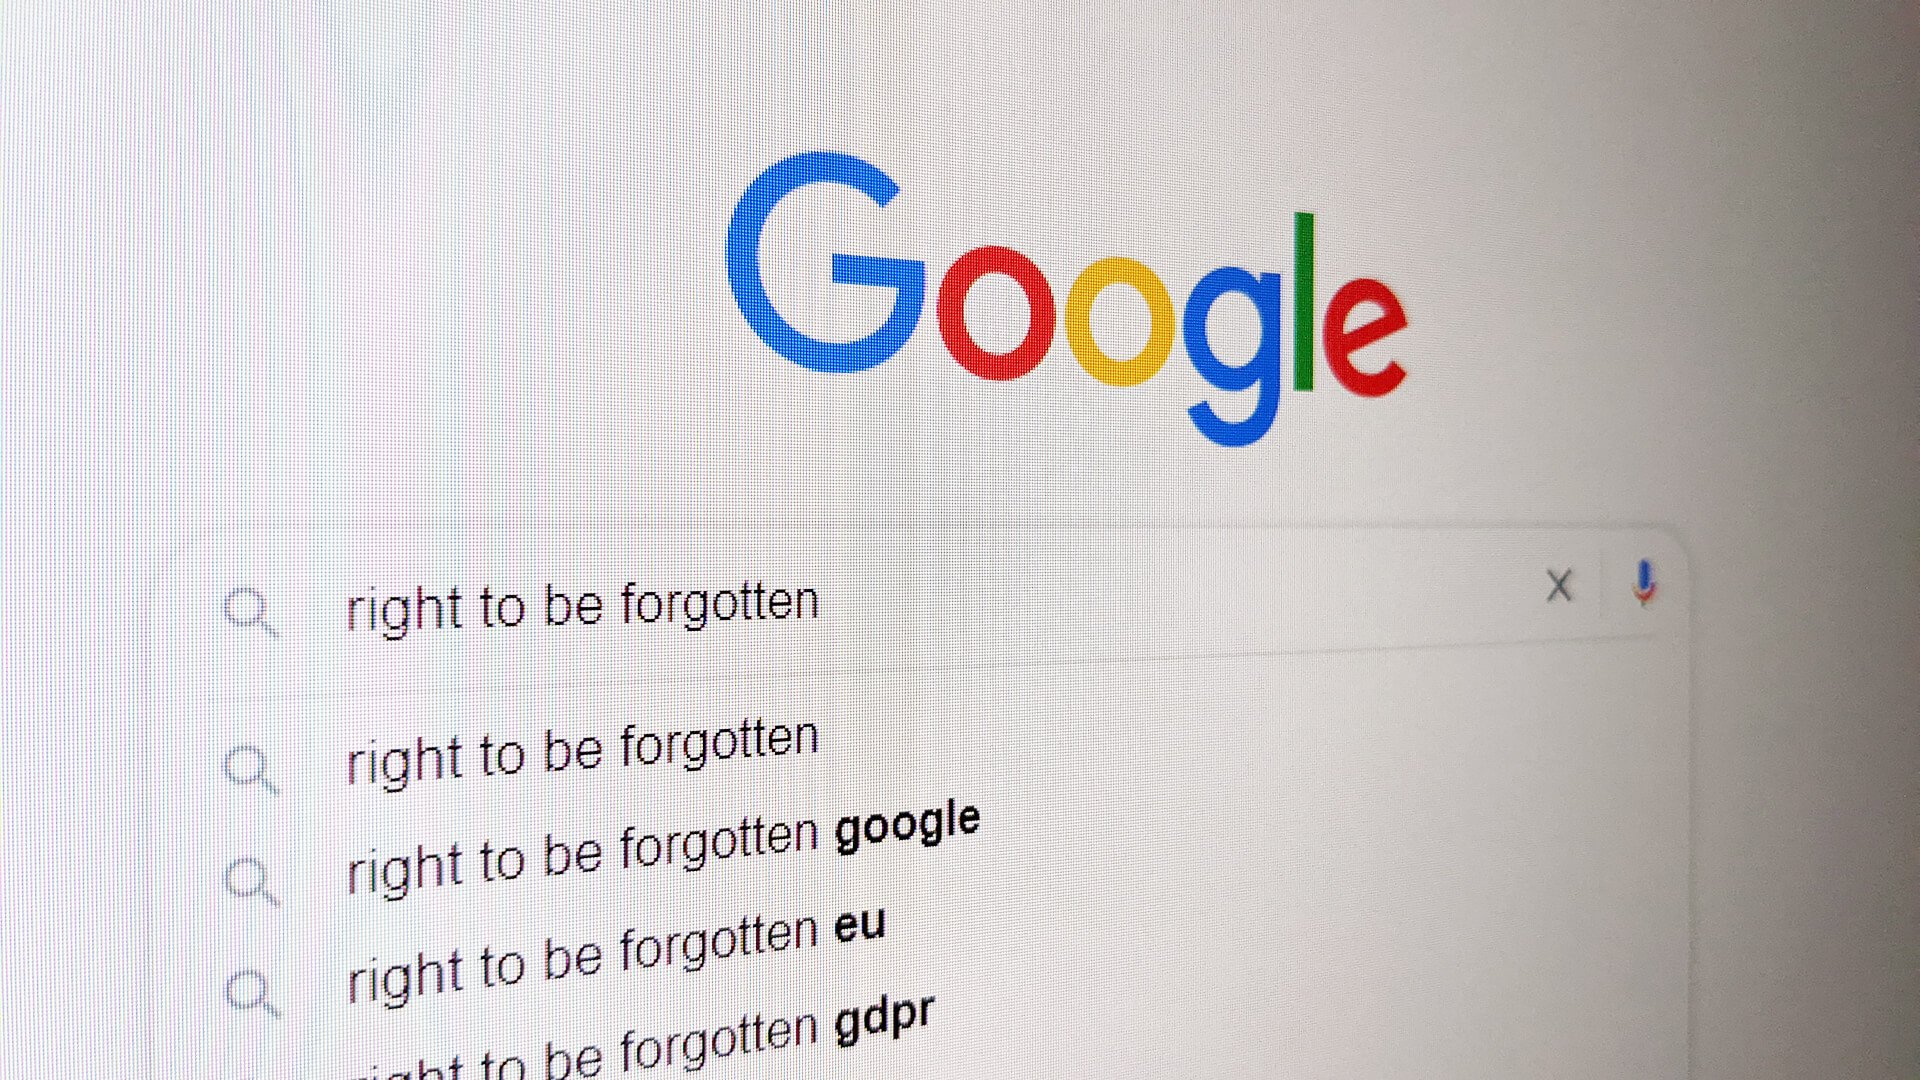 Screenshot of Google search for "right to be forgotten"